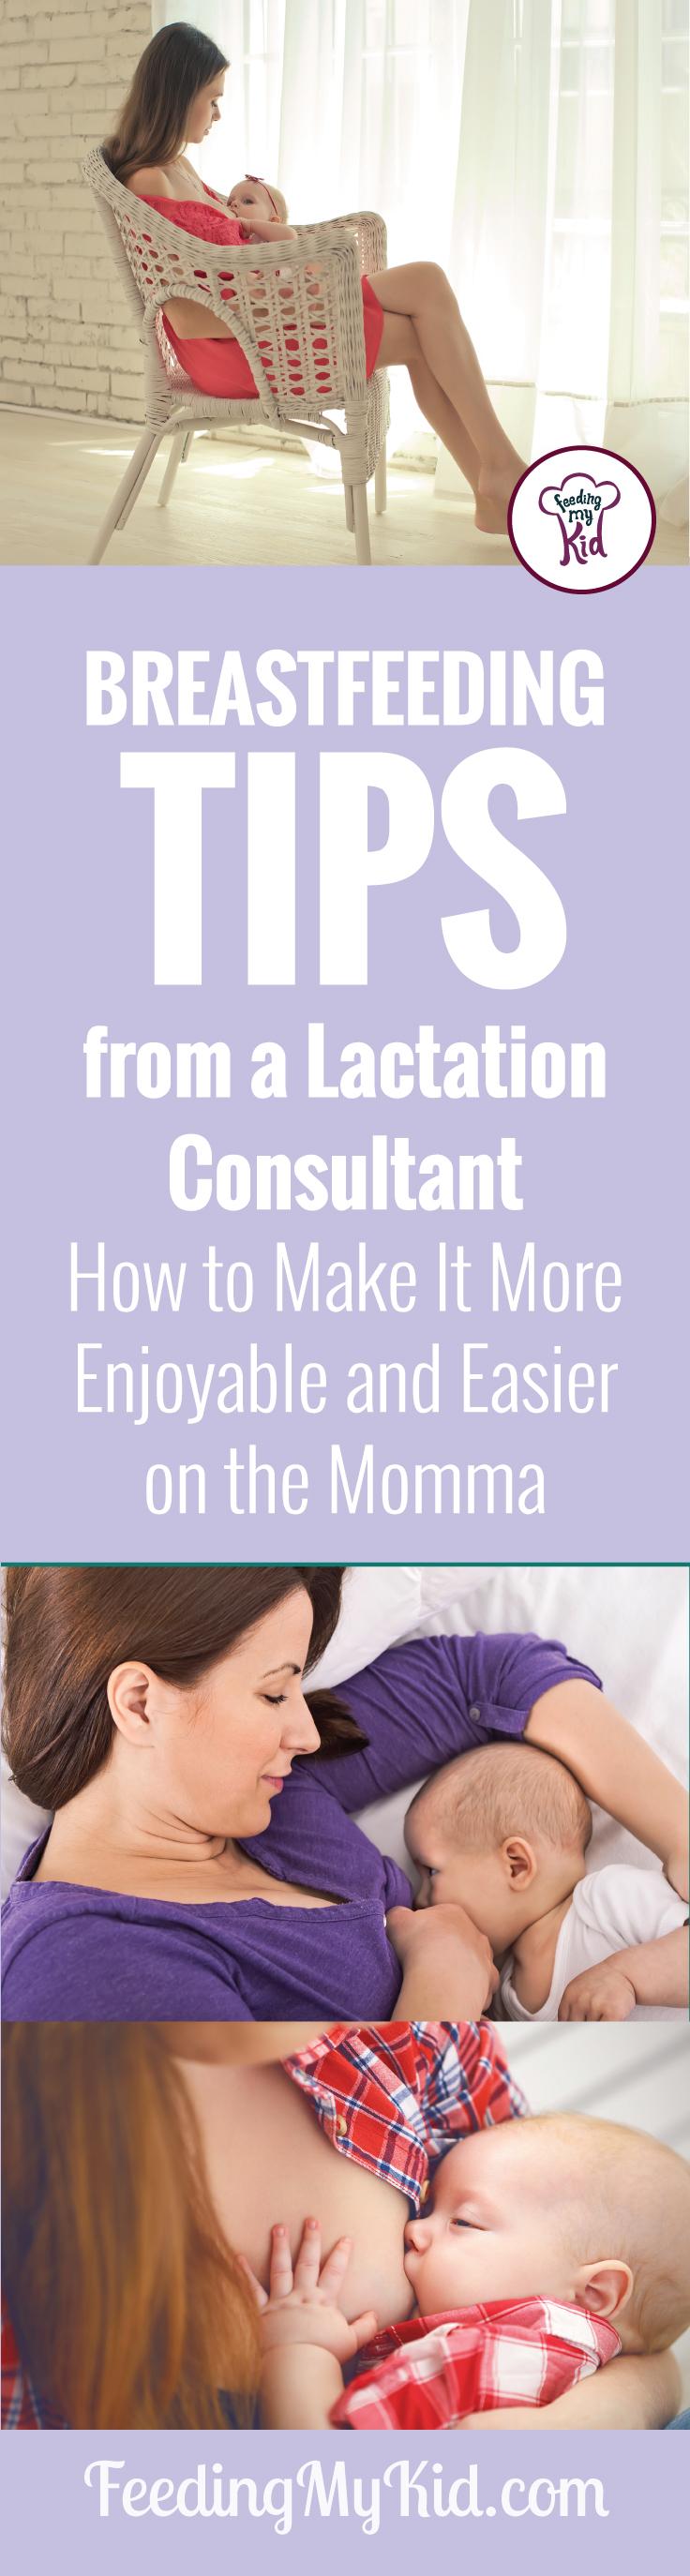 Breastfeeding Tips from a Lactation Consultant. How to Make Breastfeeding More Enjoyable